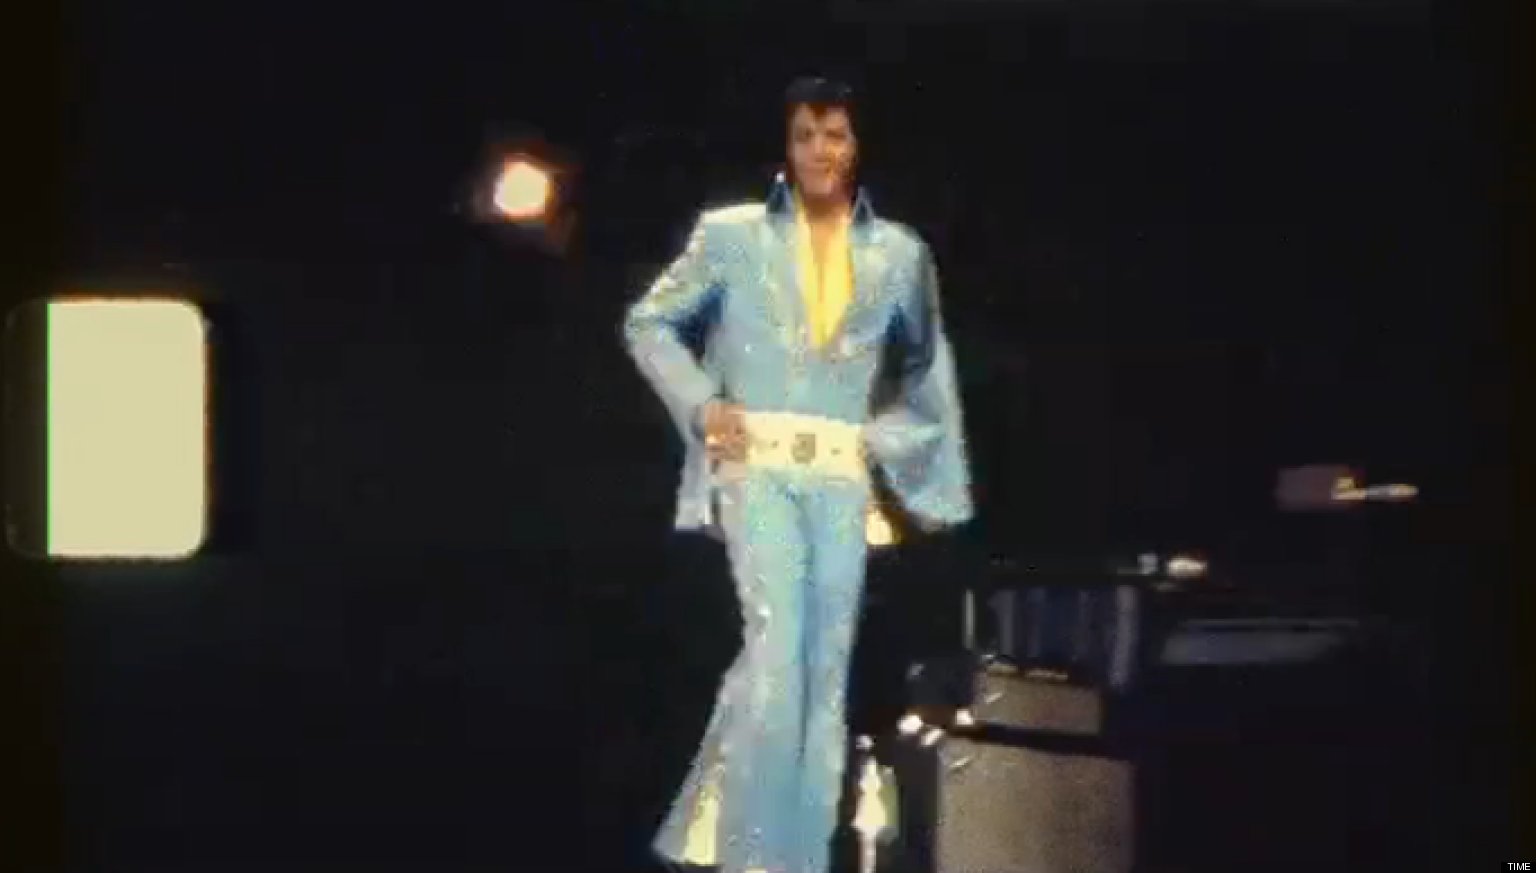 Elvis Presley Concert Footage Offers A New Look At The King (VIDEO) | HuffPost